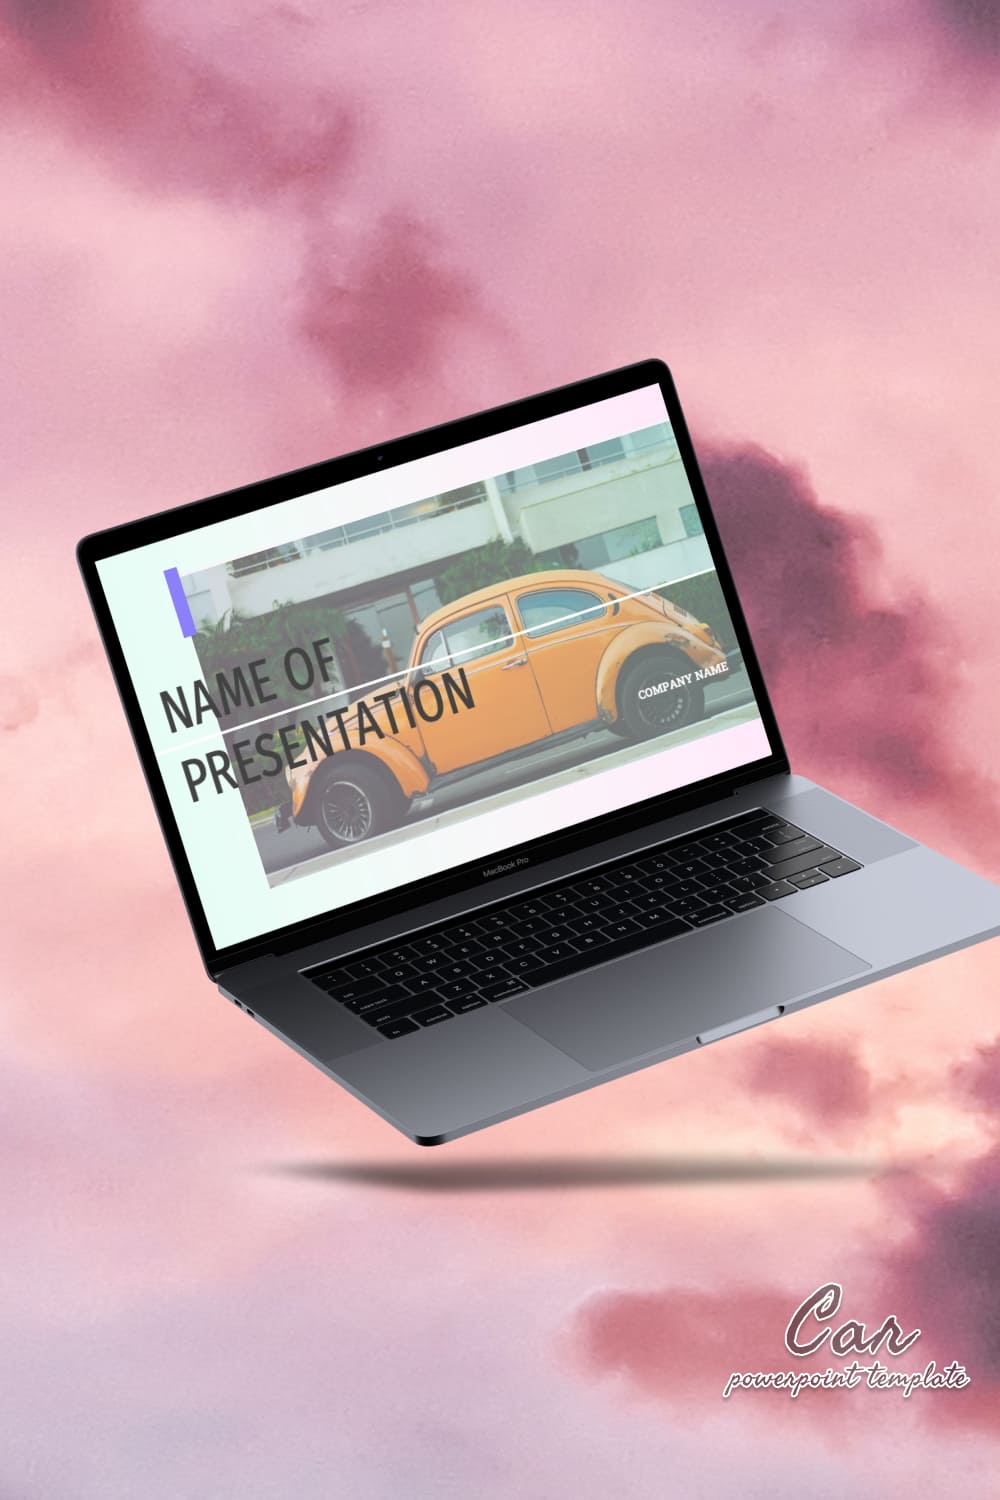 Car powerpoint template - pinterest image preview.